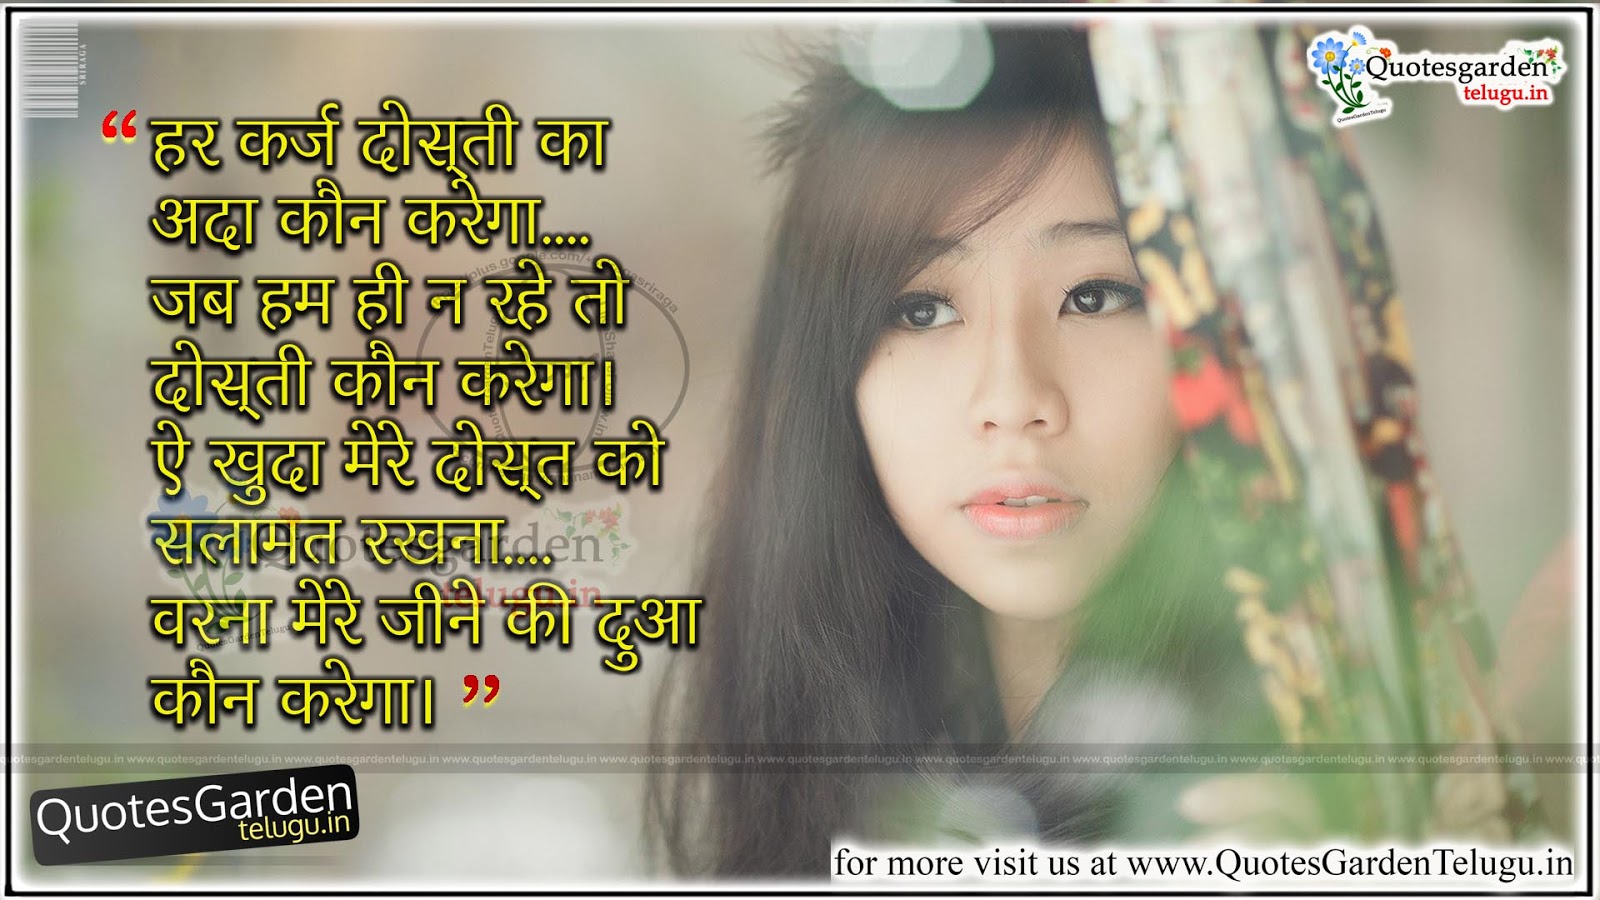 Best Friendship Quotes in Hindi images sms messages | QUOTES GARDEN